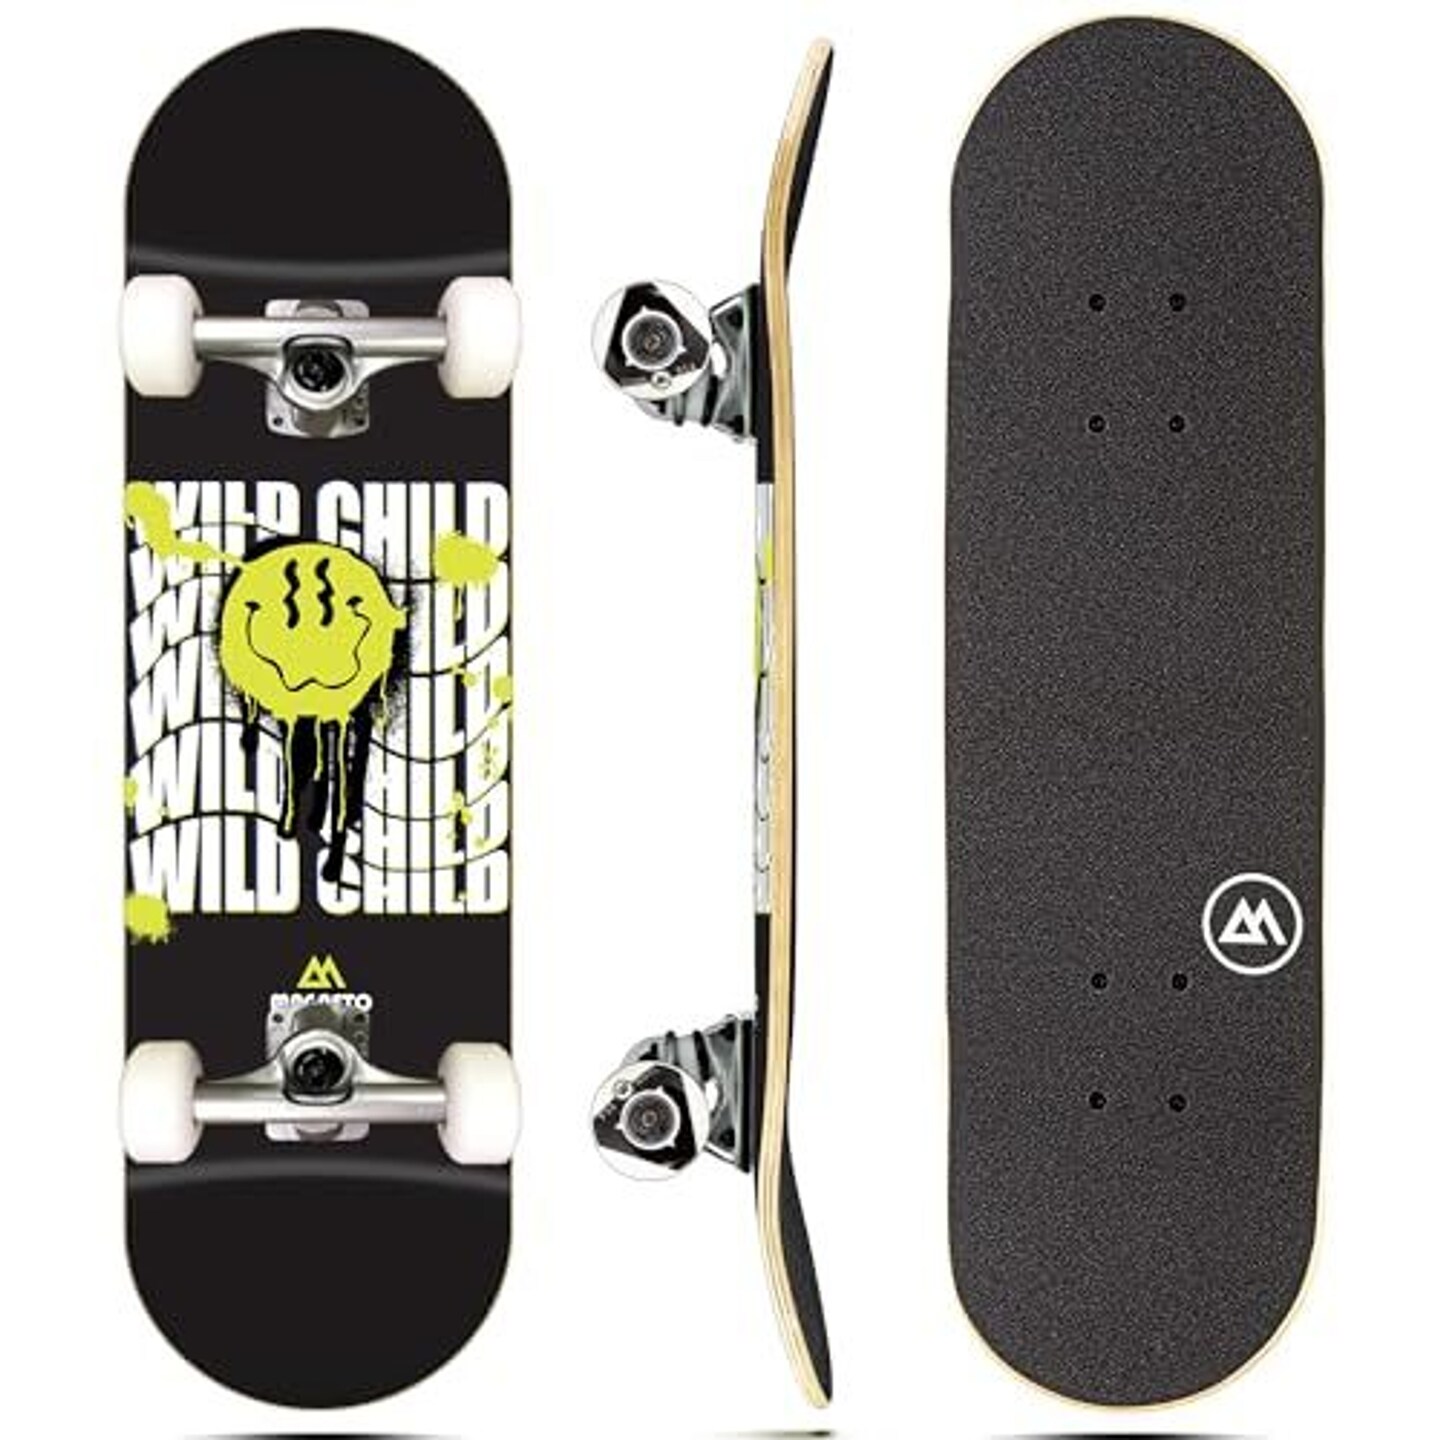 Magneto Complete Skateboard | Maple Wood | ABEC 5 Bearings | Double Kick Concave Deck | Kids Skateboard Cruiser Skateboard | Skateboards for Beginners, Teens &#x26; Adults (Free Stickers Included)